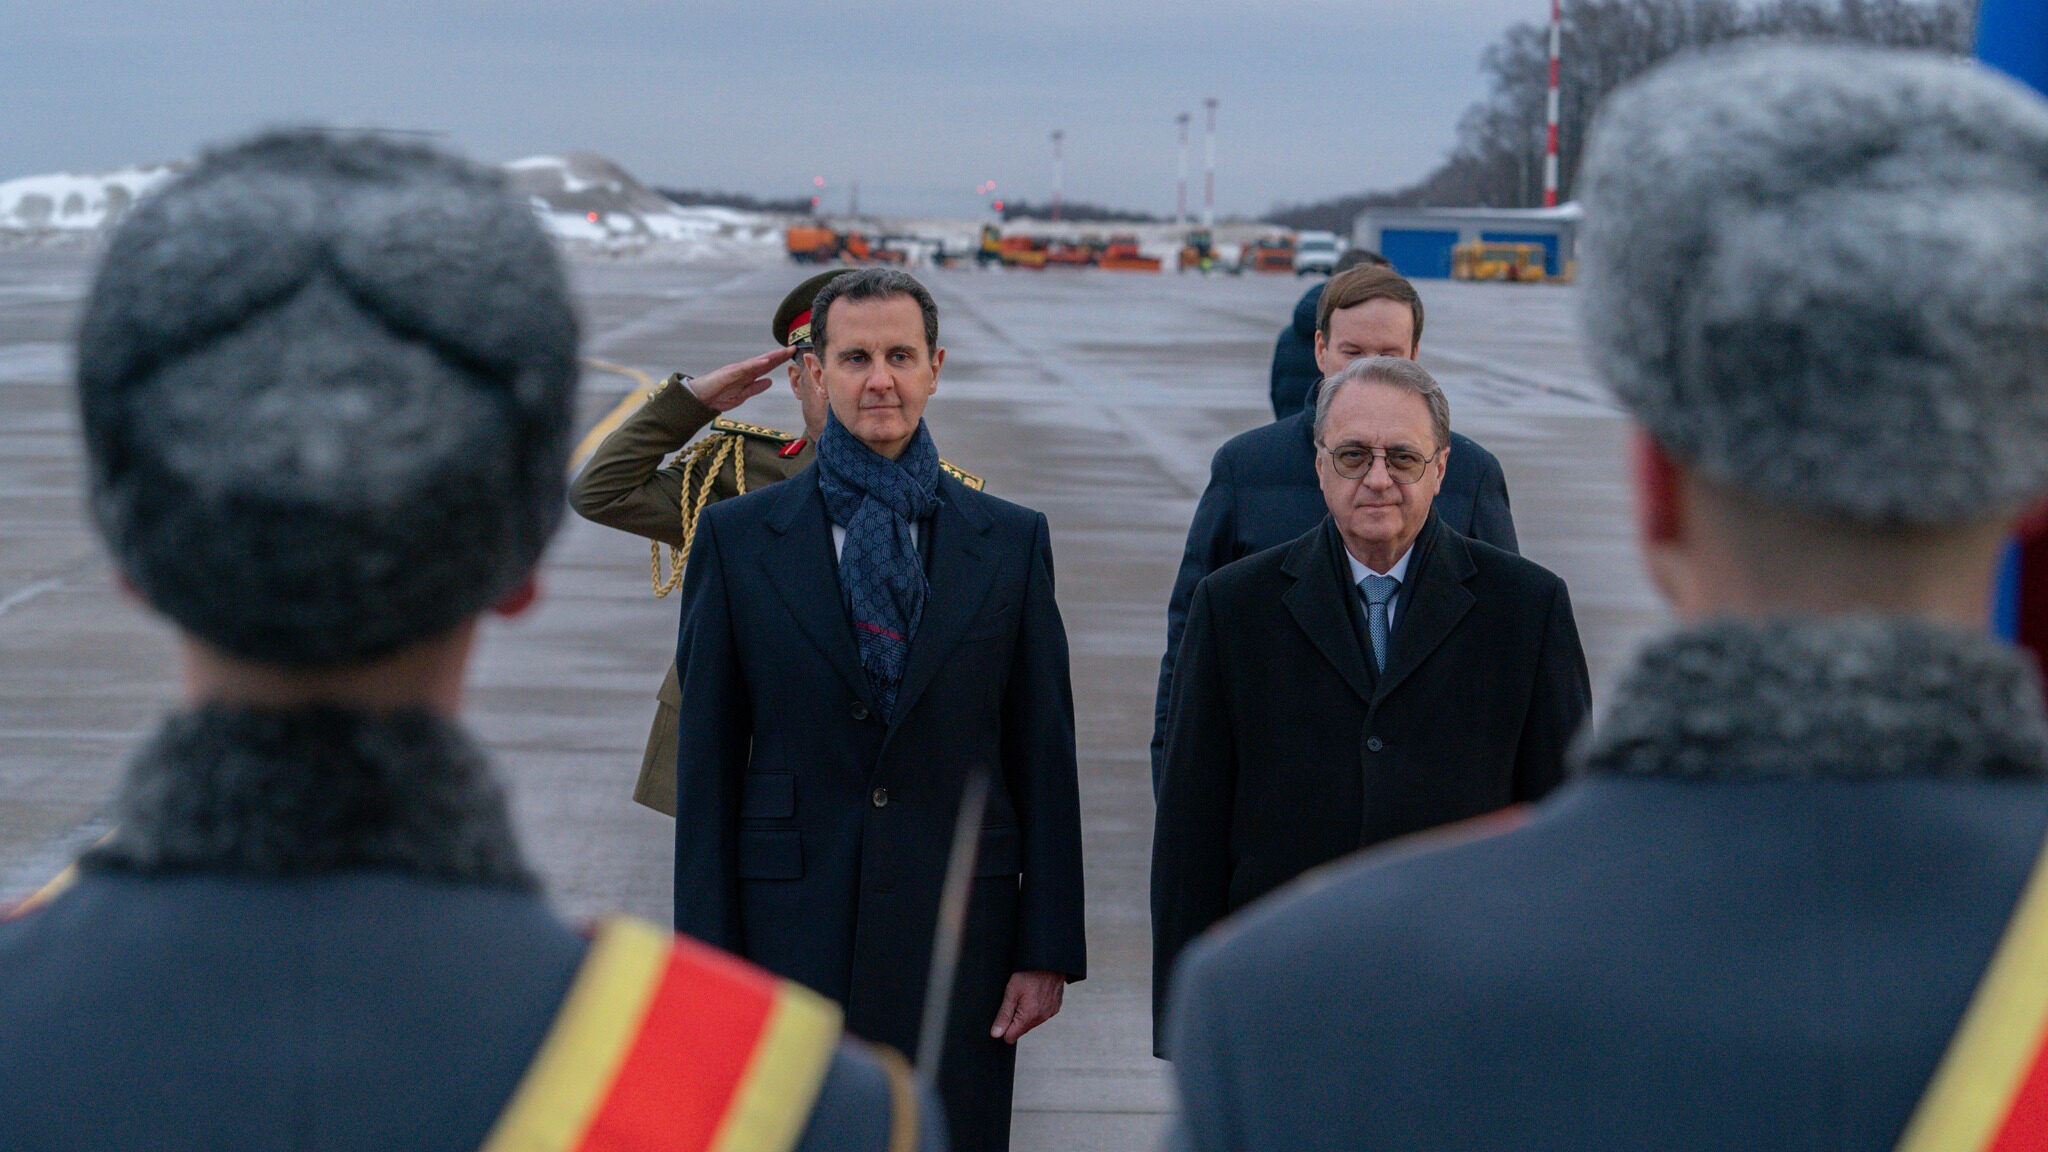 Syrian President Assad Arrives In Moscow, Will Hold Important Meeting With President Putin